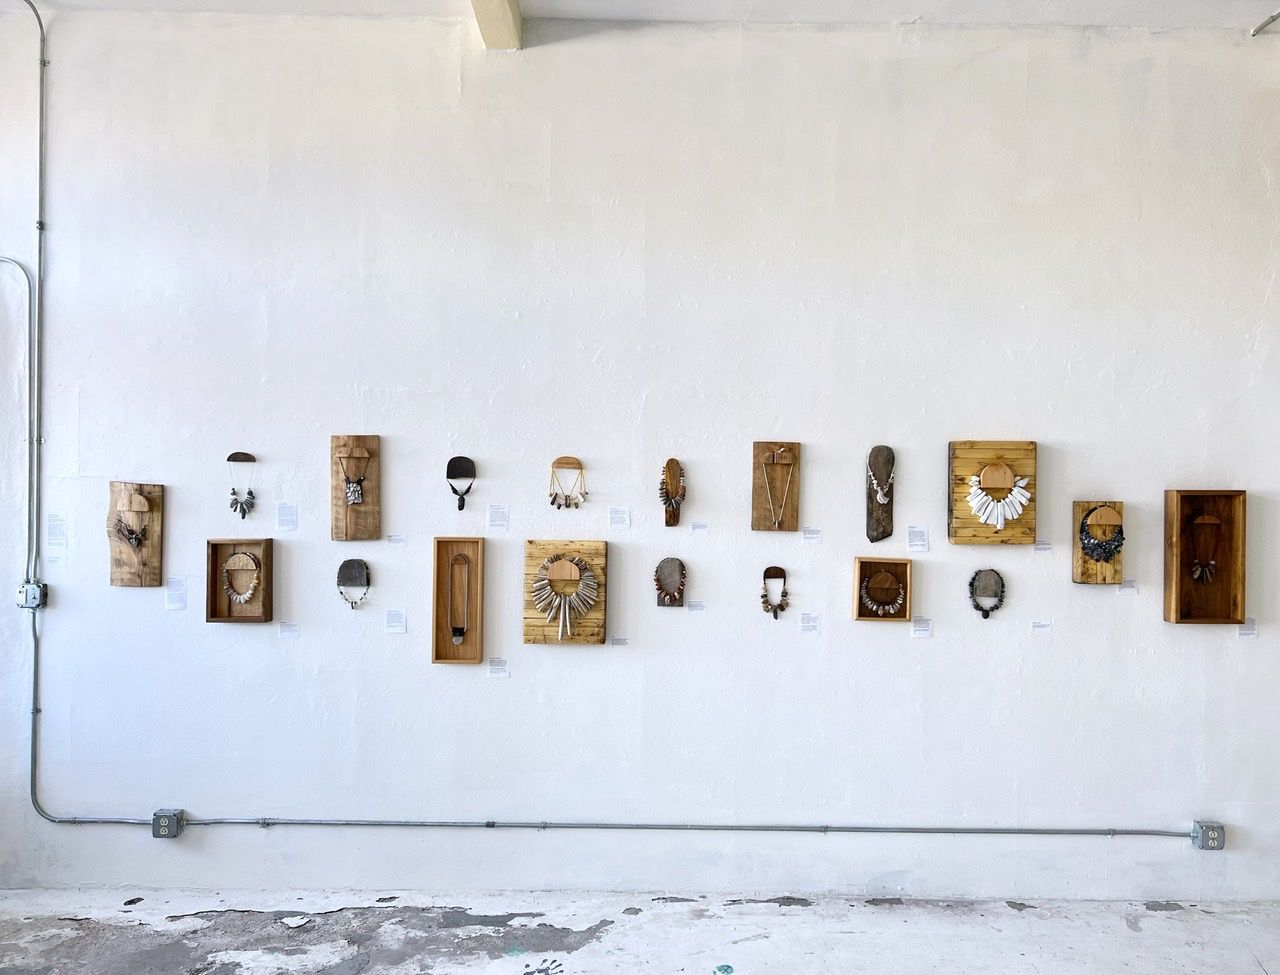 19 necklaces of stone, beads, string and wood hang on wooden frames on a white gallery wall